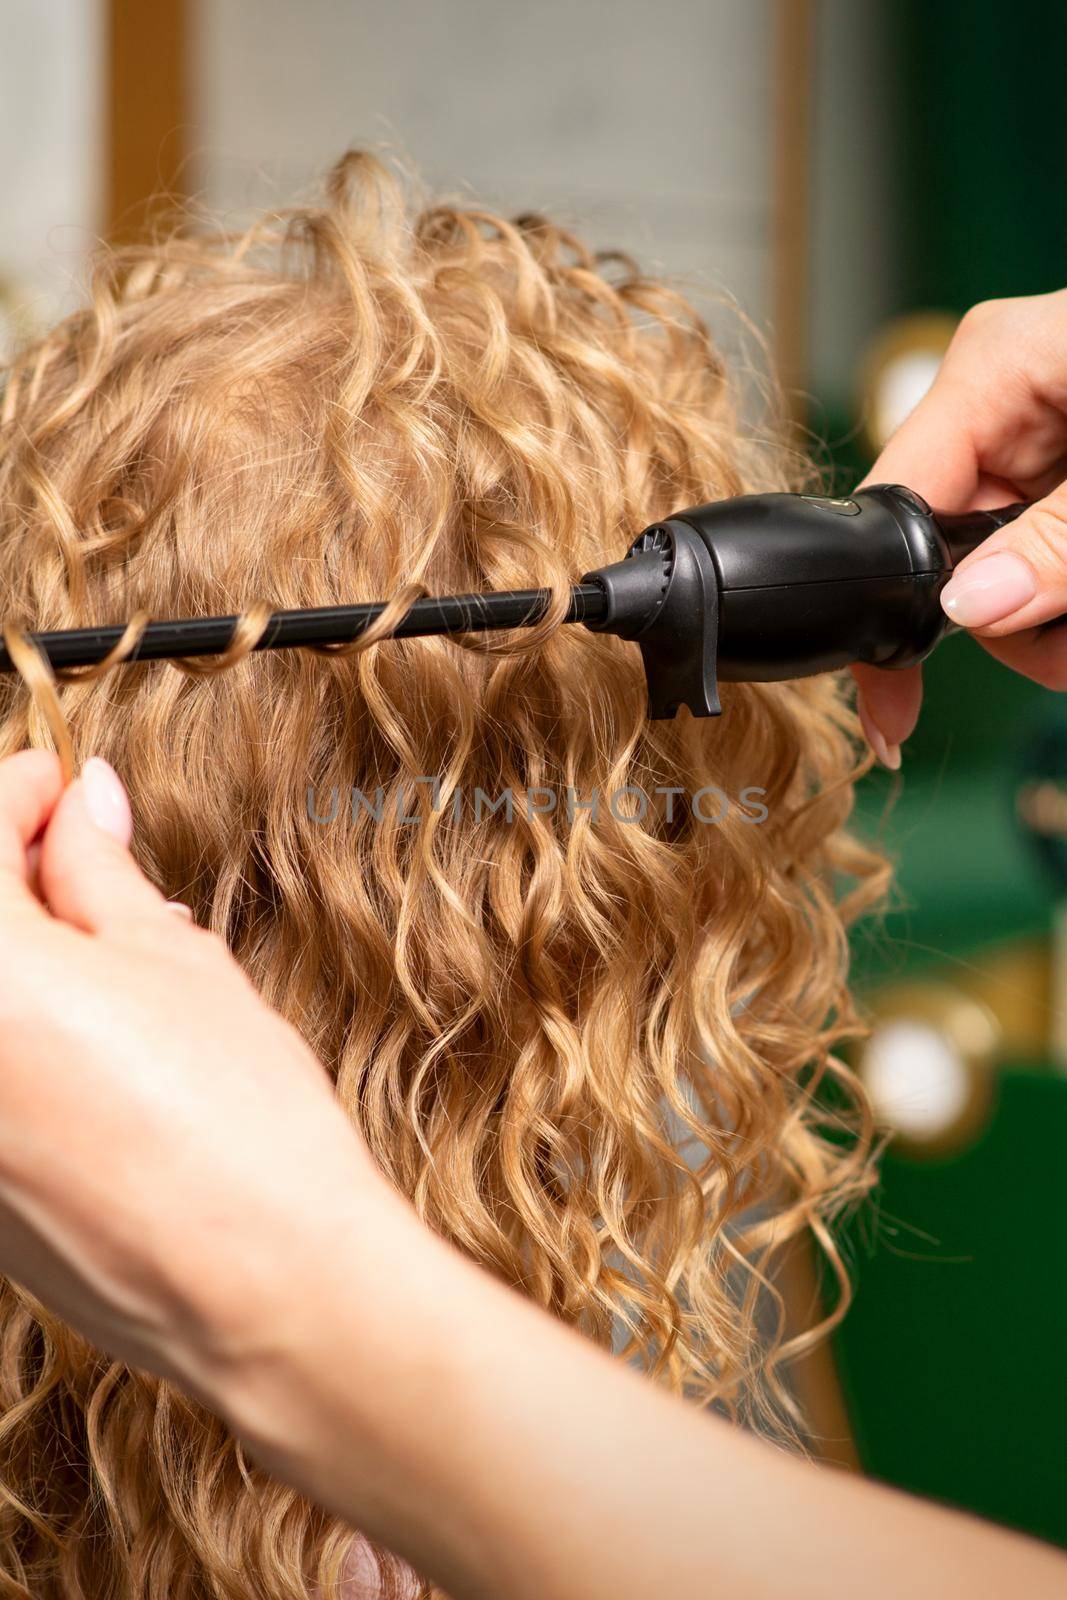 Hands of hairstylist curl wavy hair of young woman using a curling iron for hair curls in the beauty salon rear view